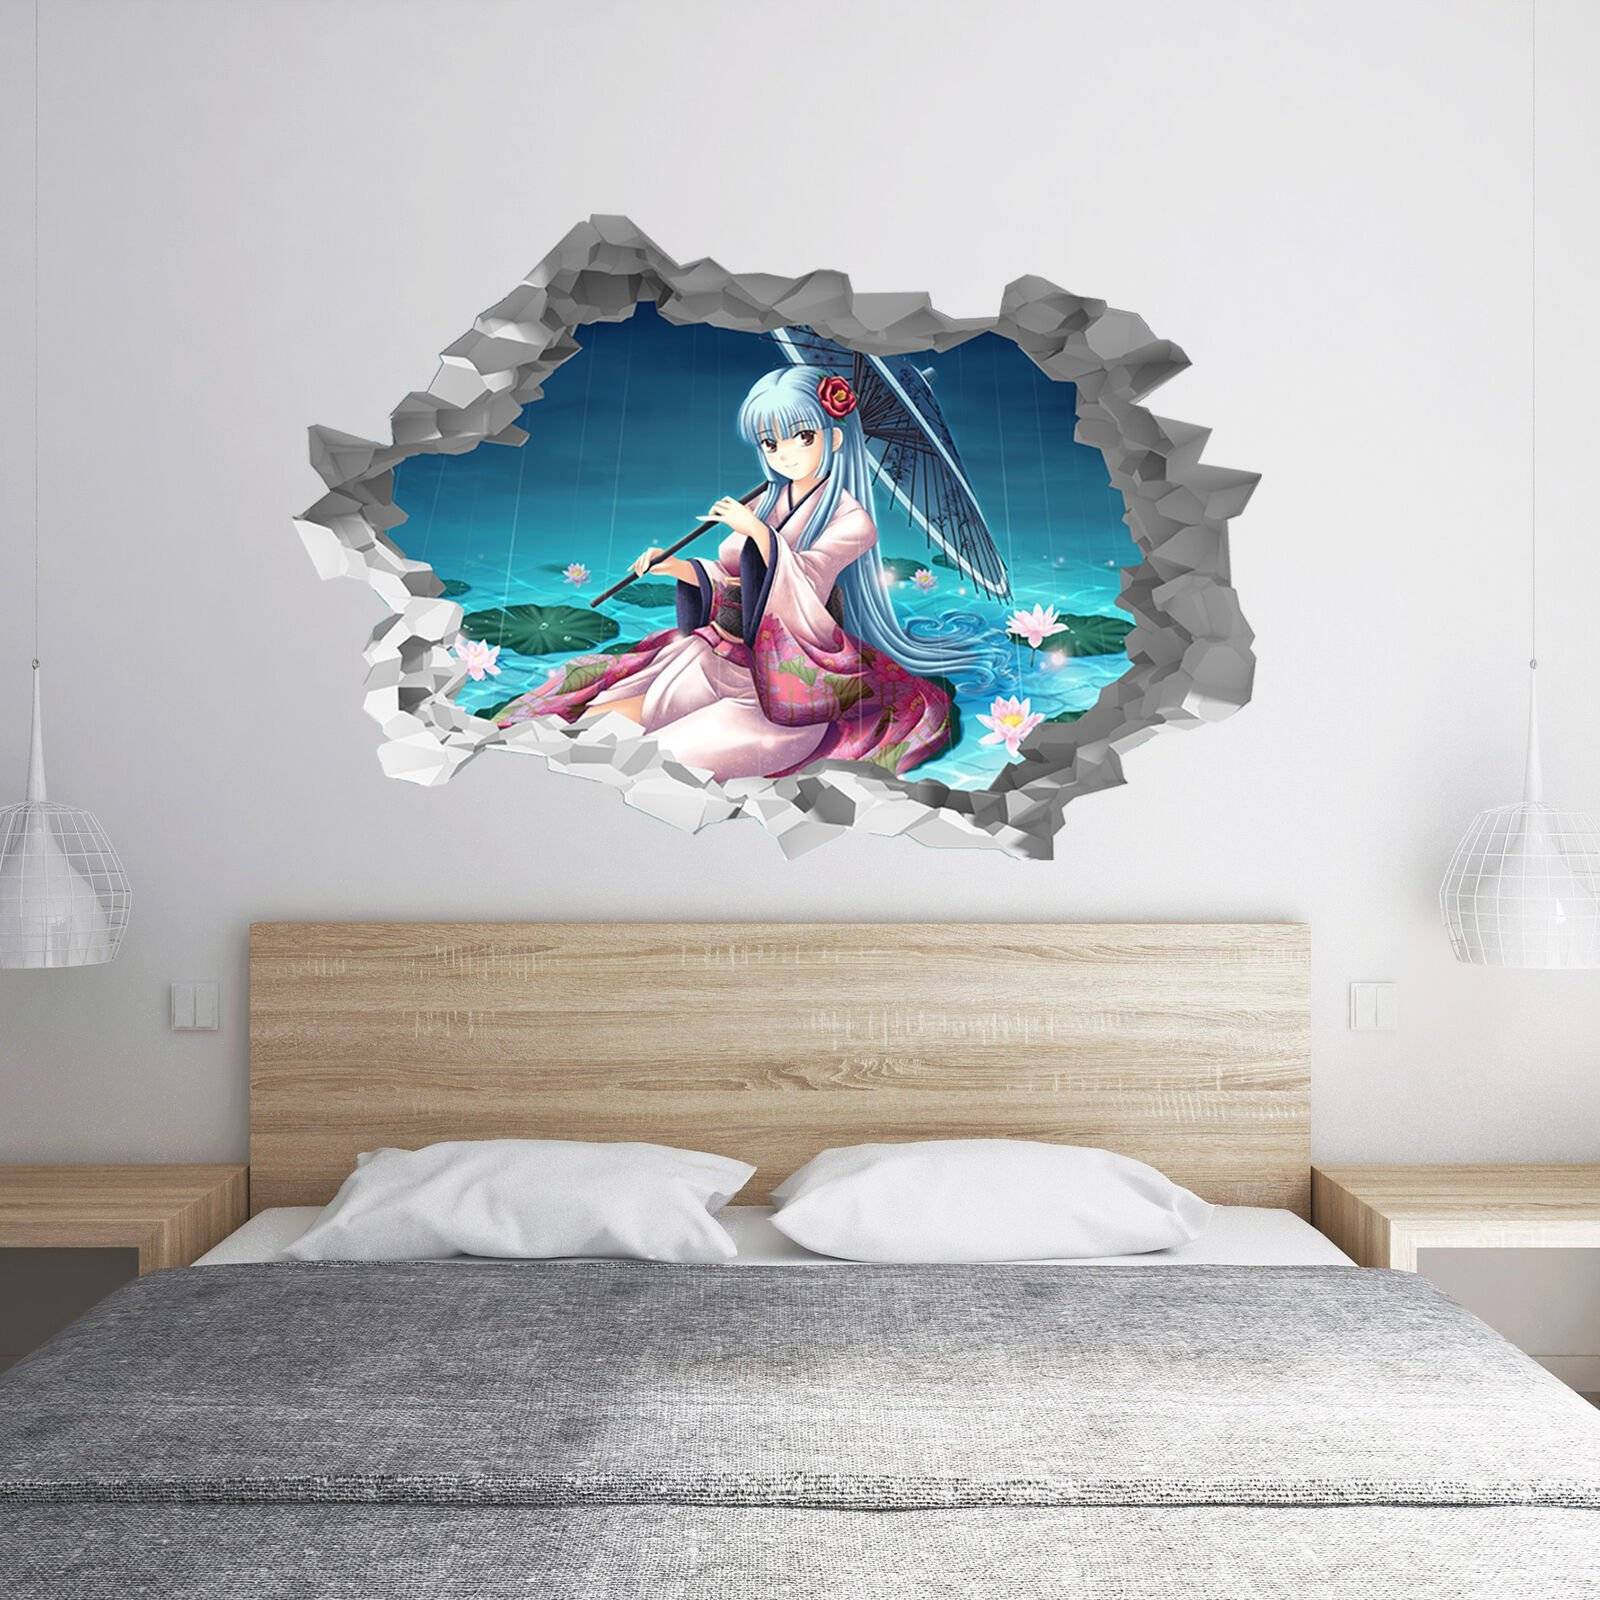 32 Walls ideas | anime, wall decals, anime decals